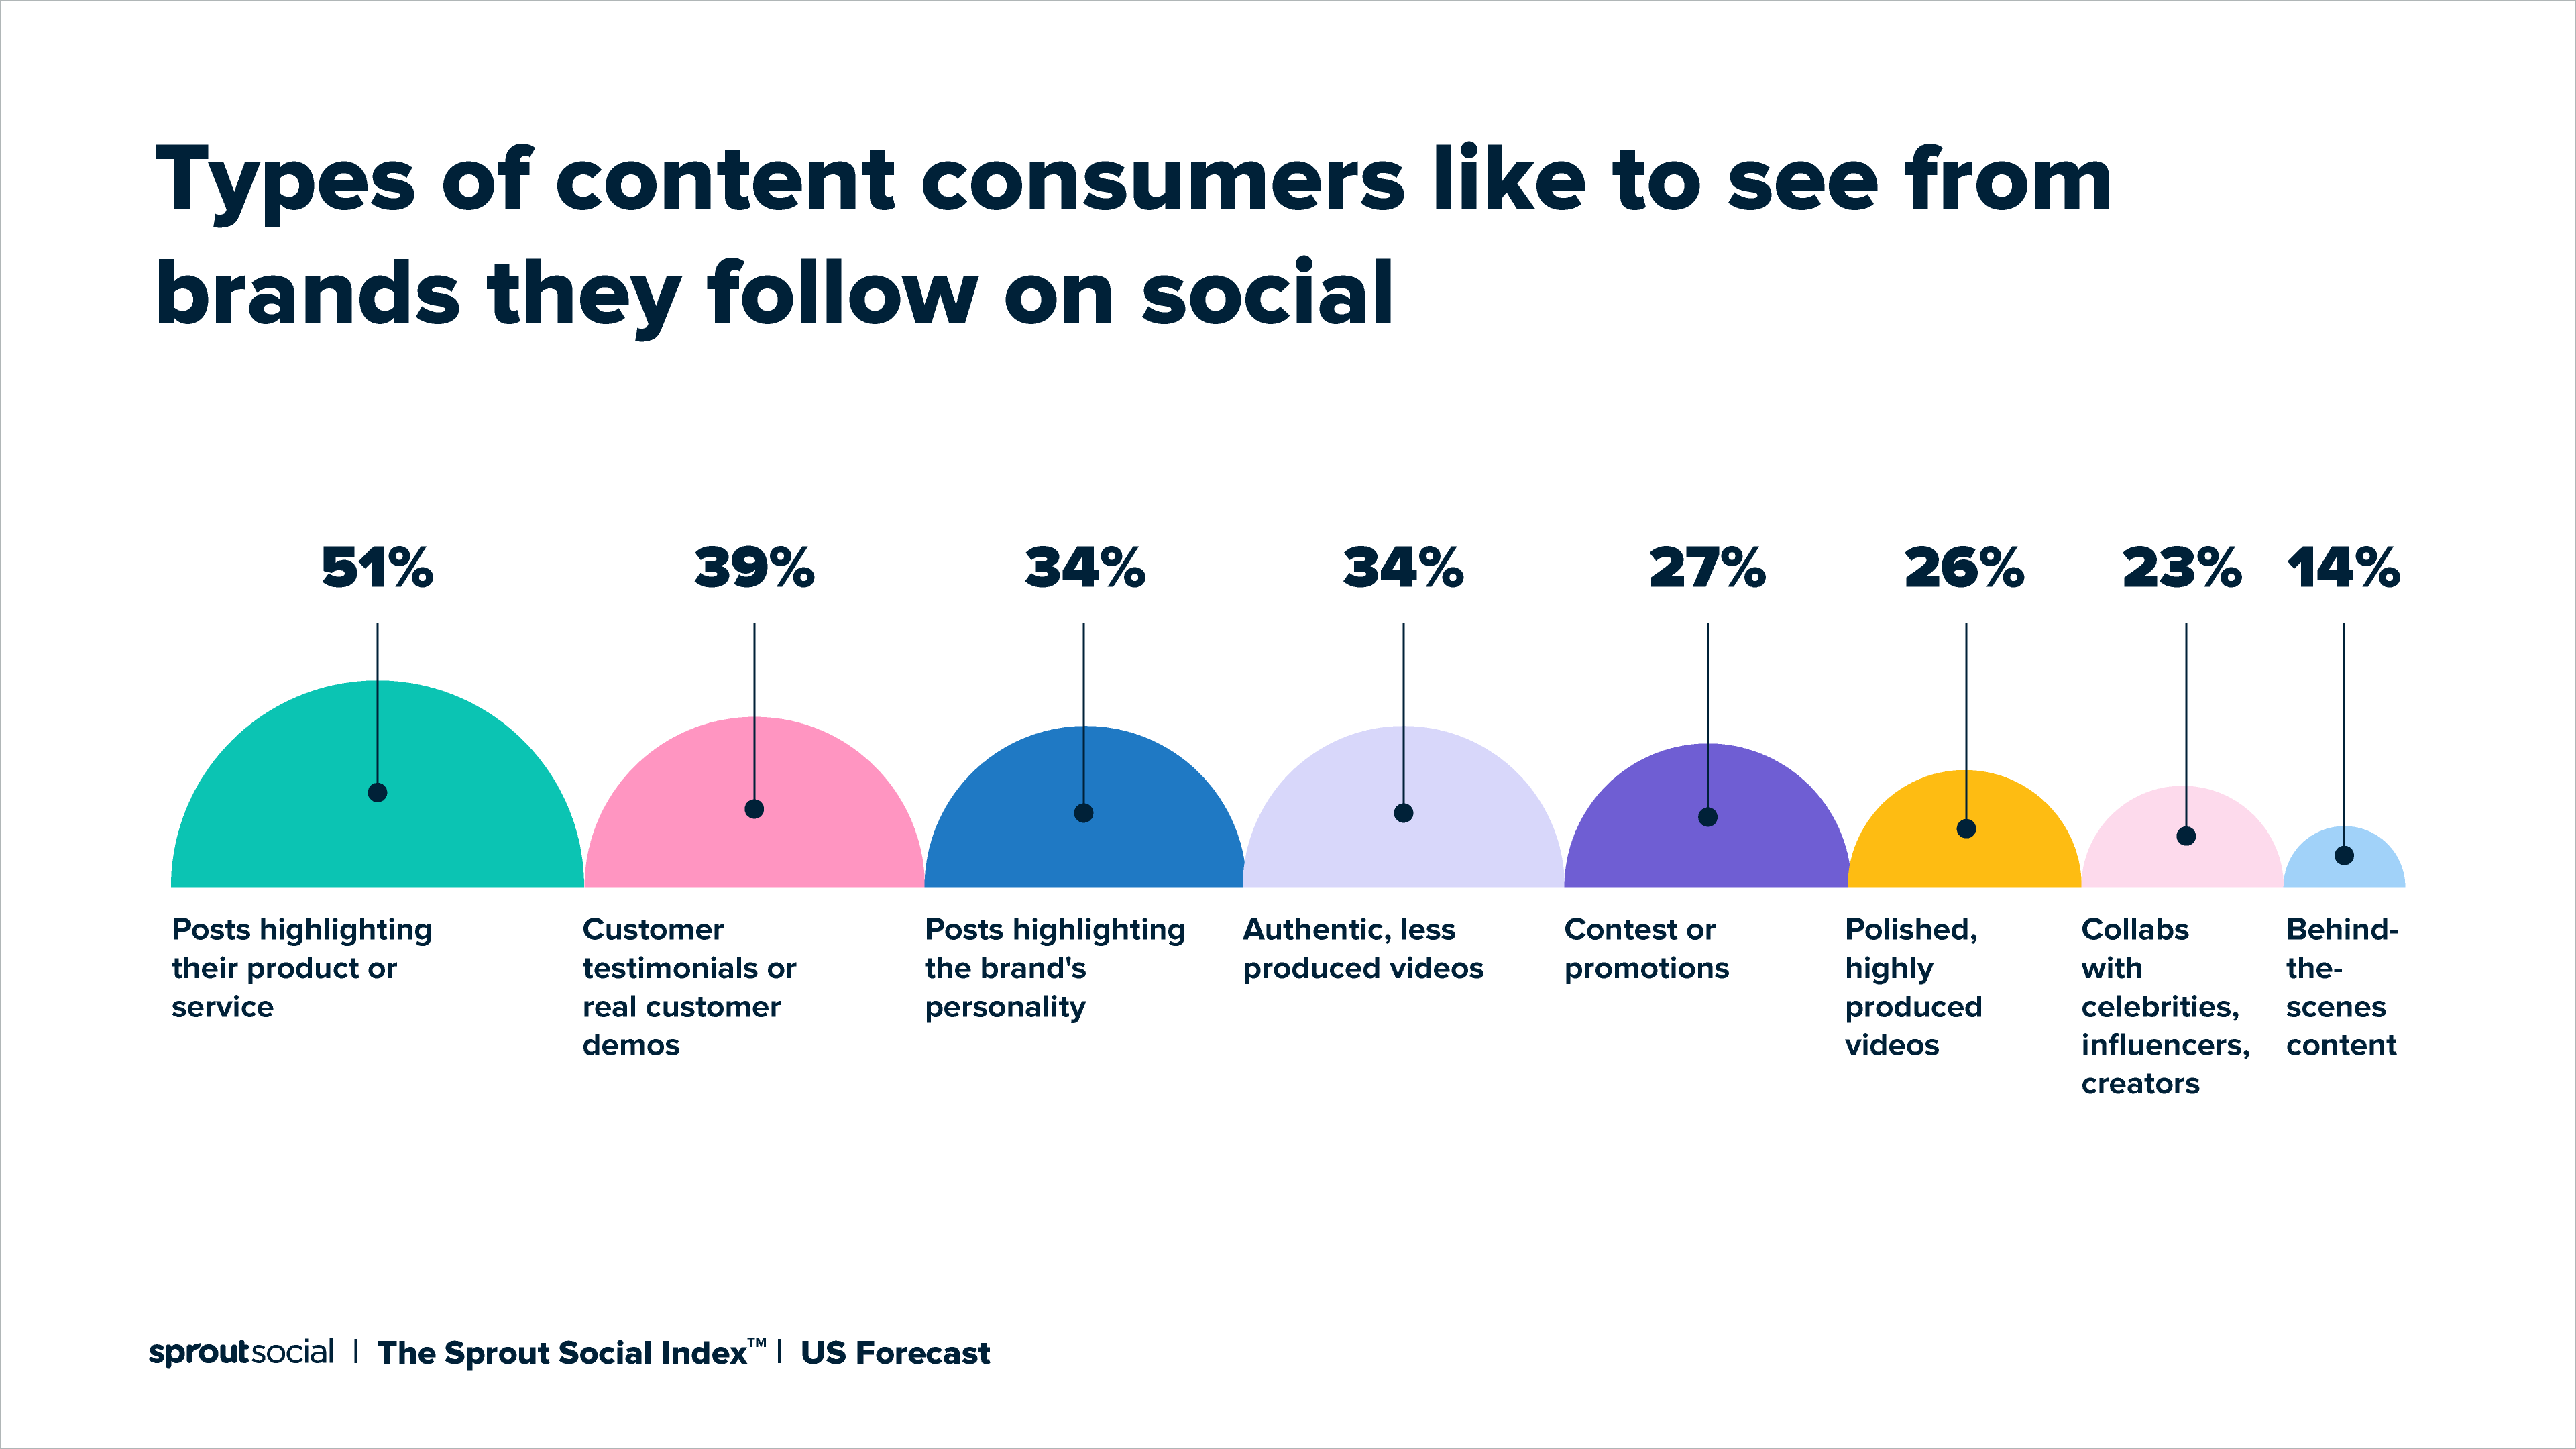 Graphic showing the types of content consumers like to see from brands they follow on social